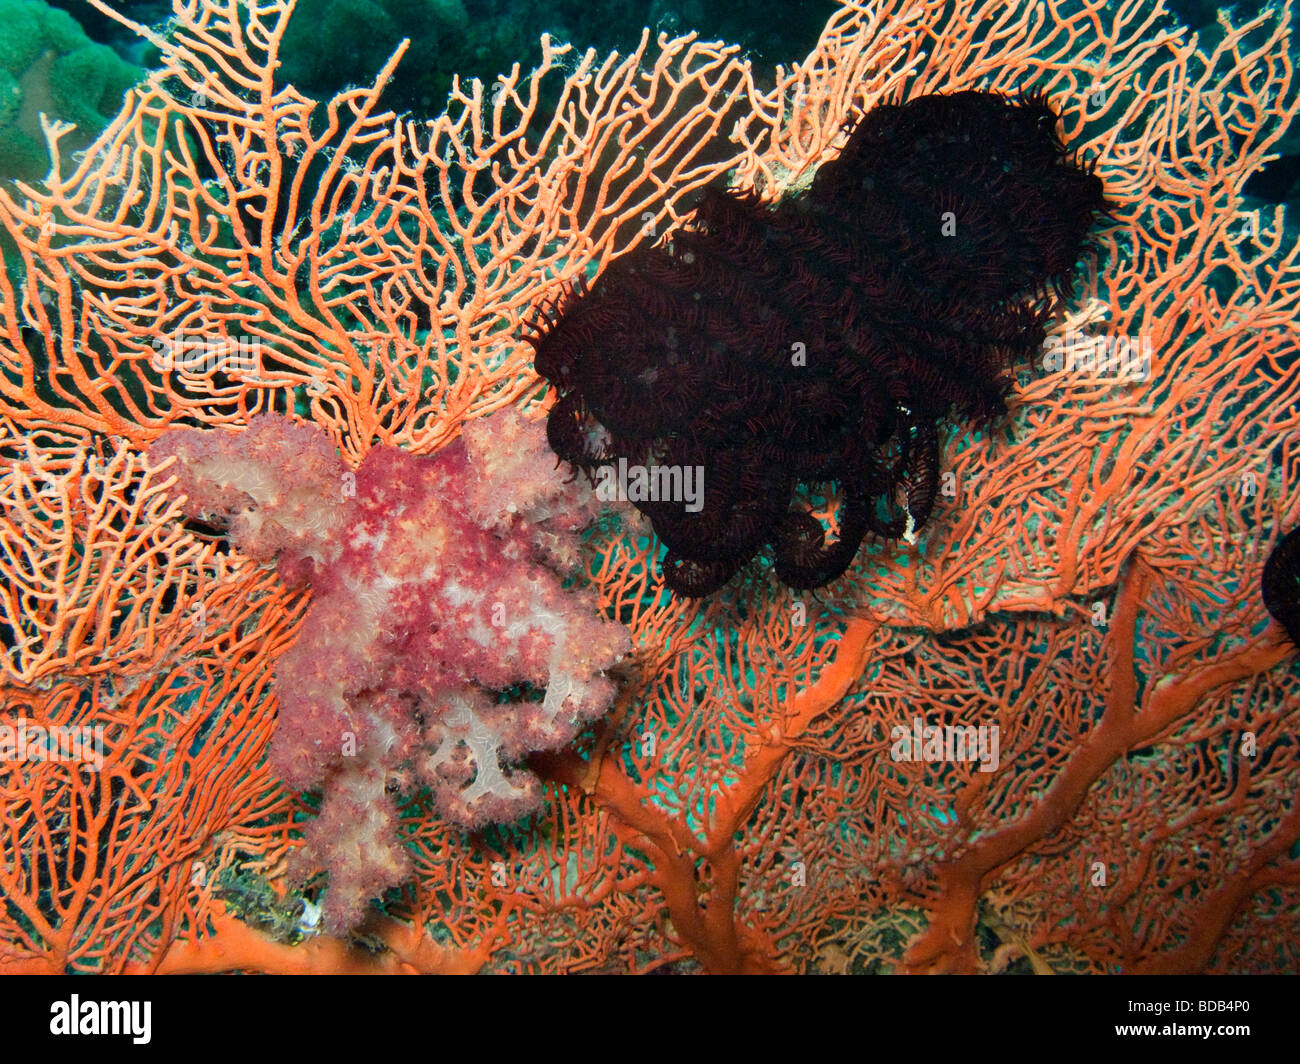 Indonesia Sulawesi Wakatobi National Park underwater colourful red soft coral and black father star on Gorgonian sea fan Stock Photo